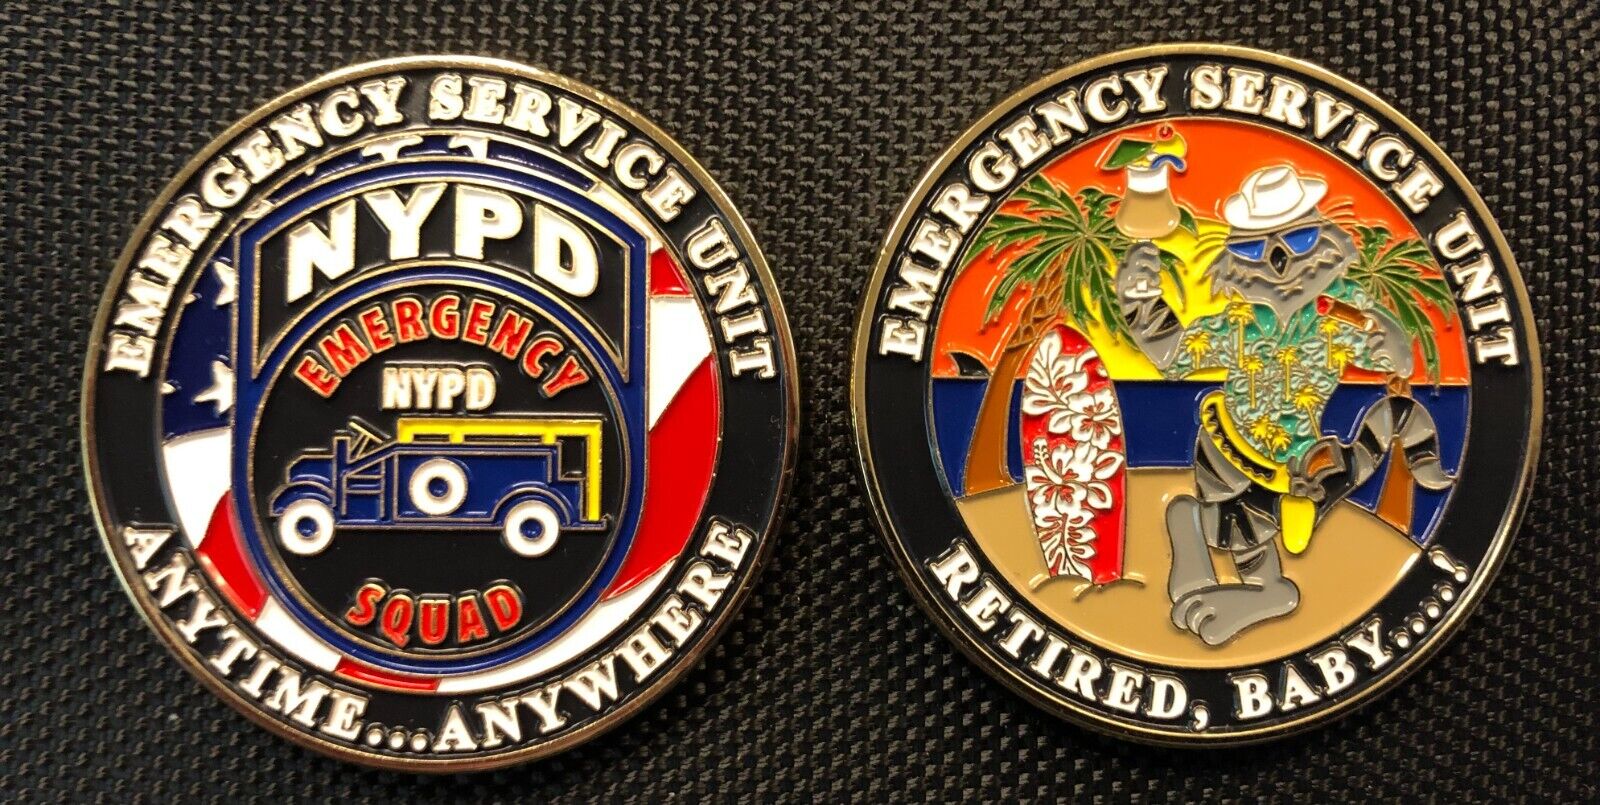 NYPD EMERGENCY SERVICE UNIT SWAT RETIRED BABY POLICE ESU CHALLENGE COIN